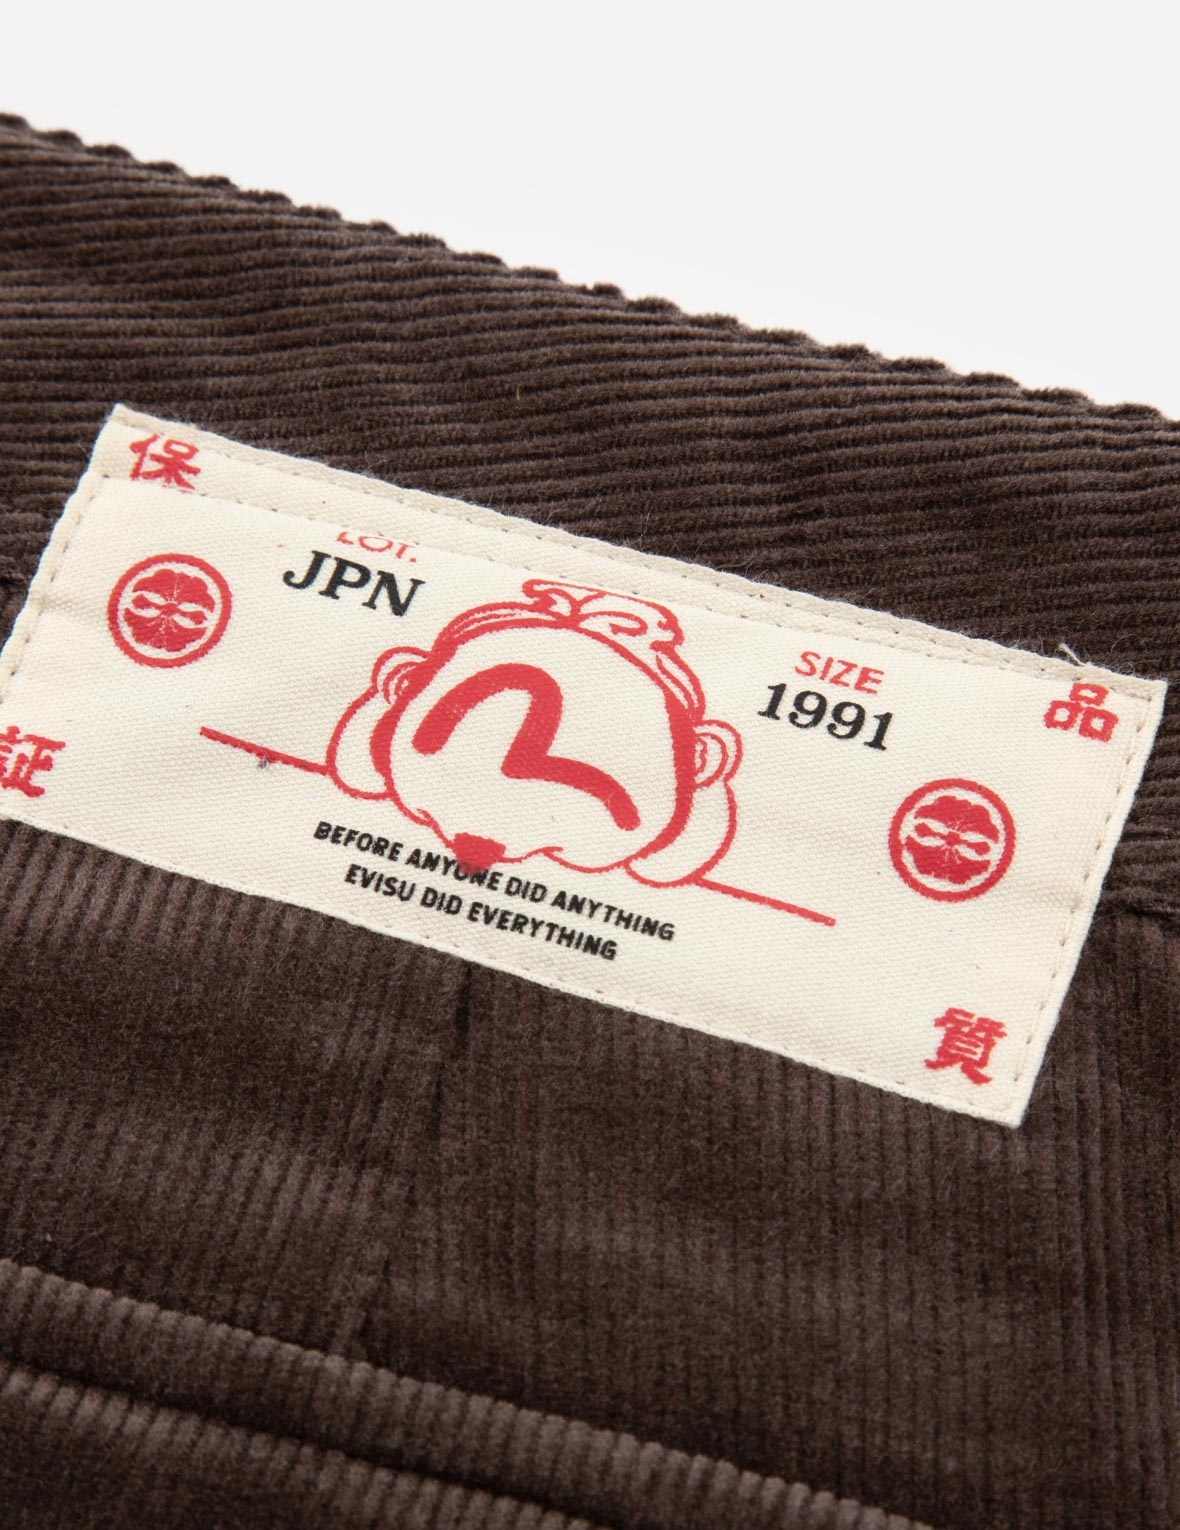 LOGO AND SEAGULL EMBROIDERY RELAX FIT CORDUROY PANTS - 11